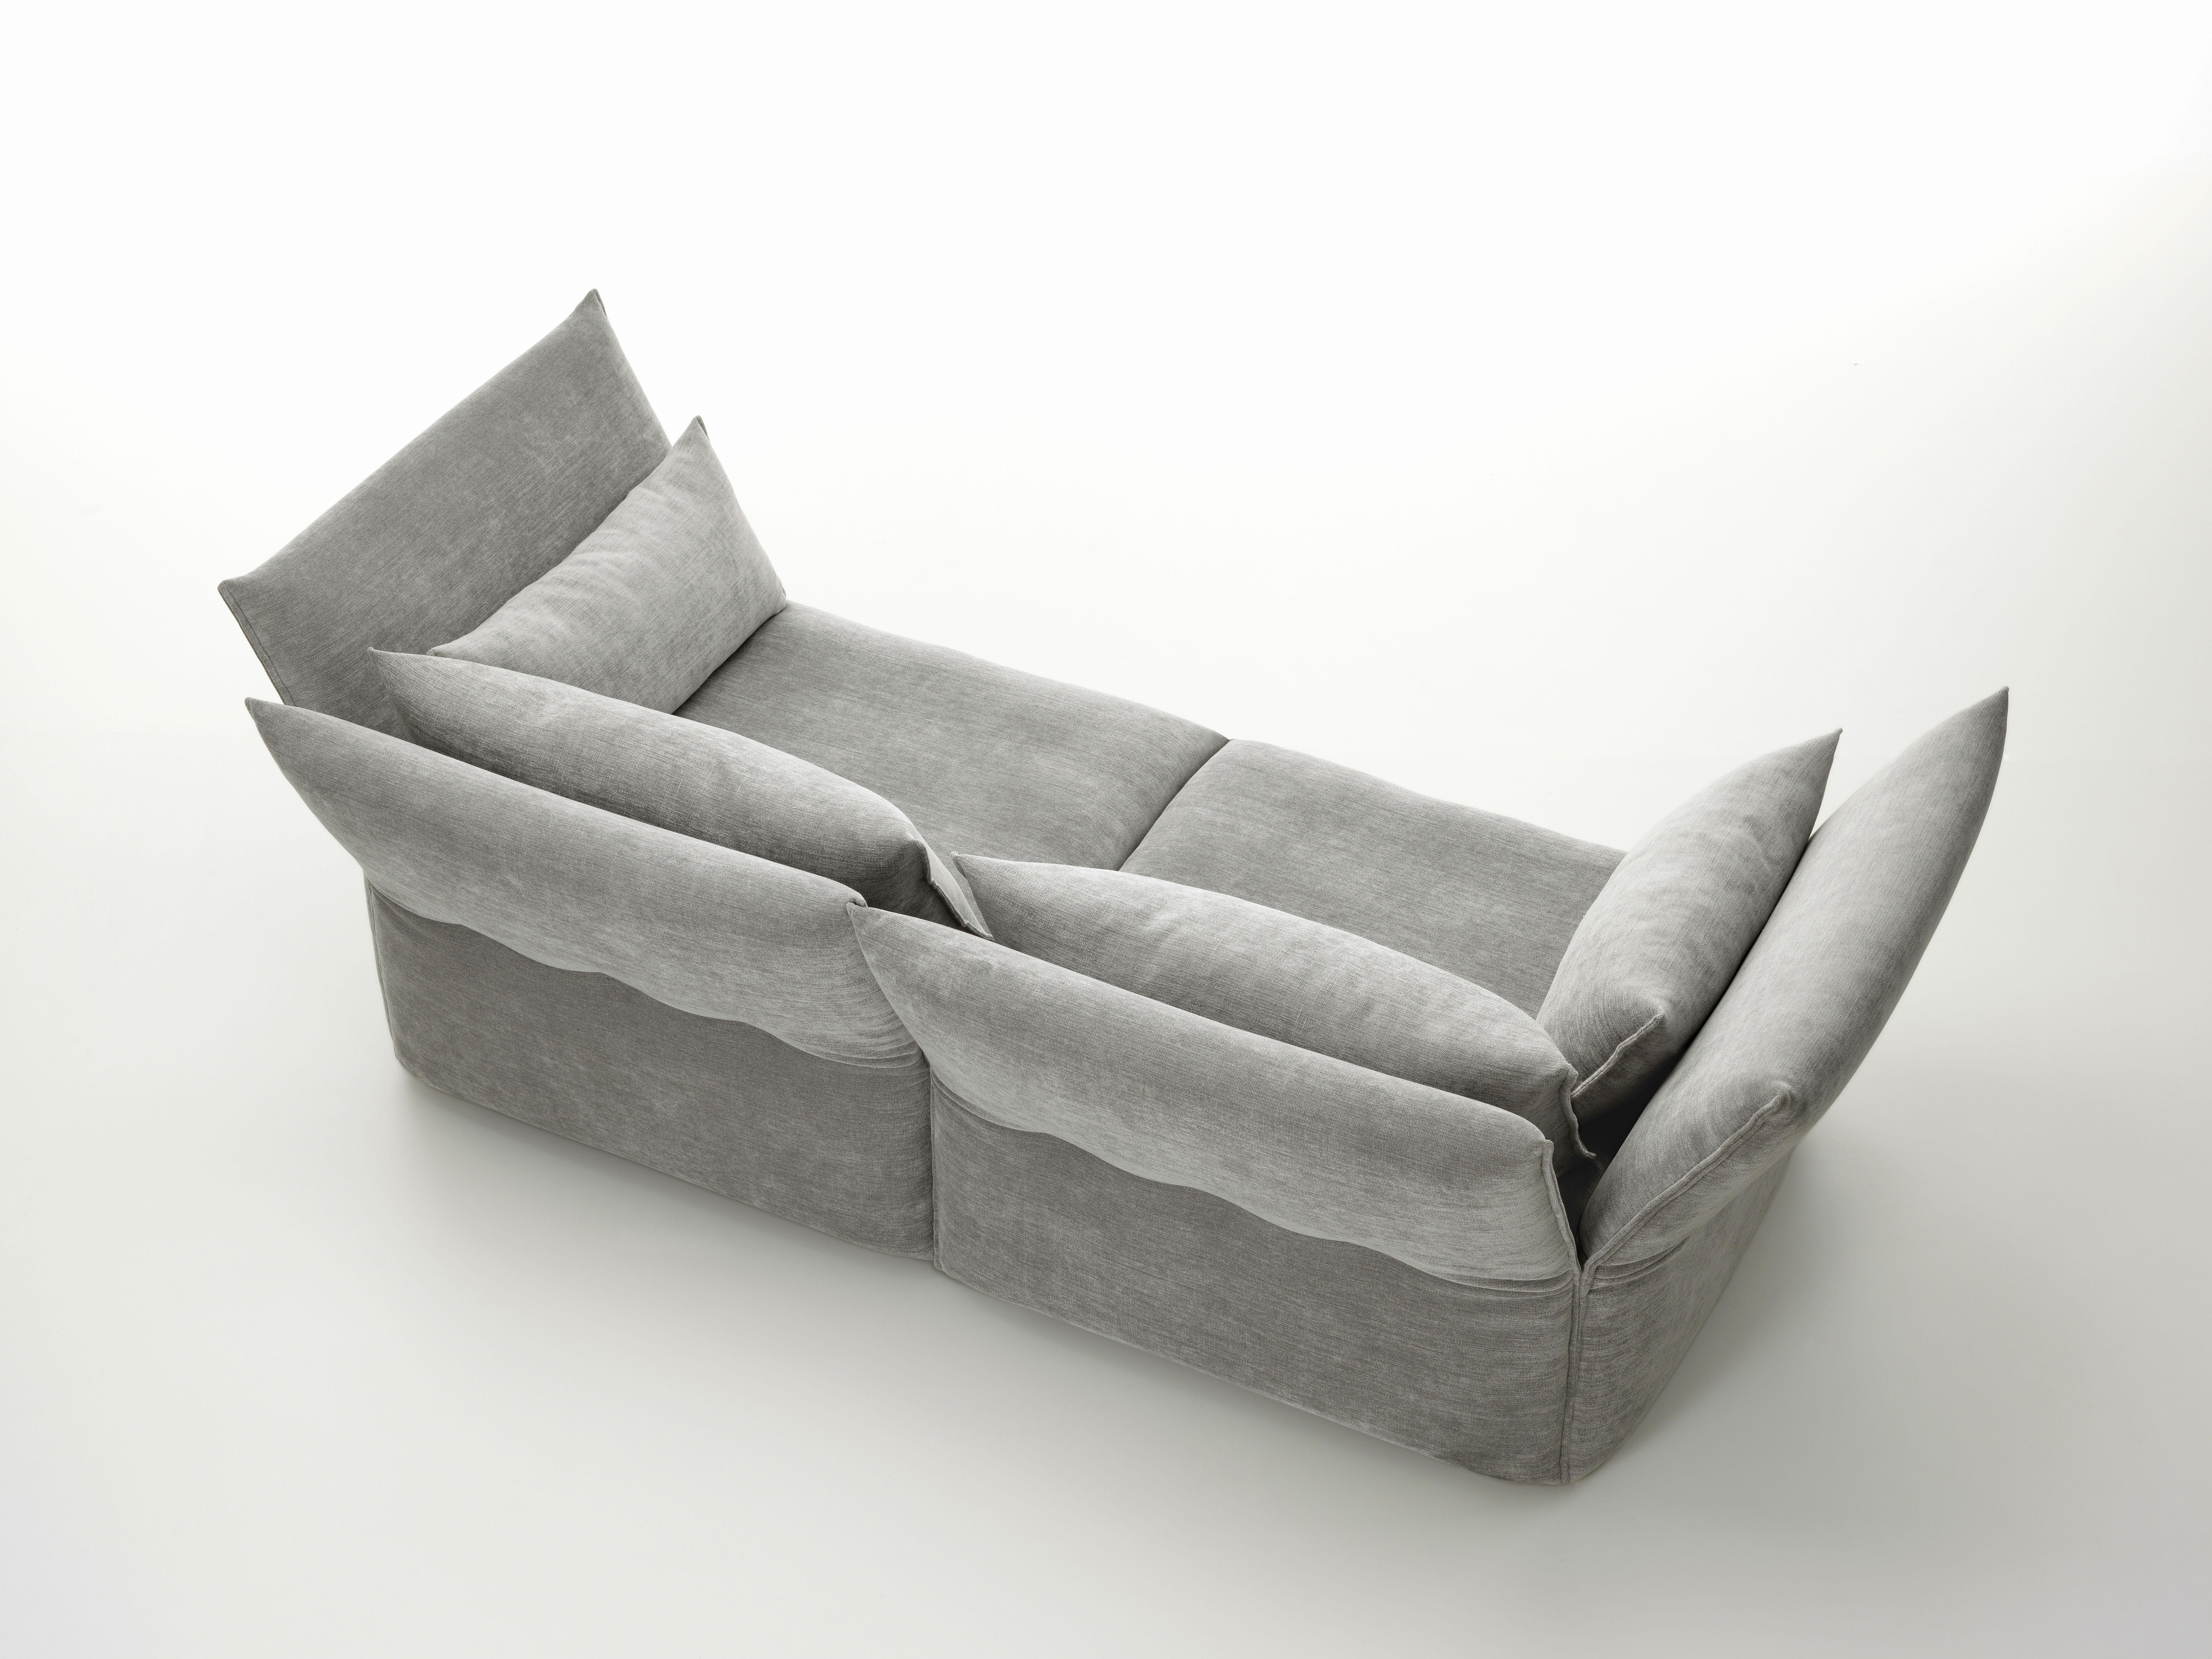 Vitra Mariposa 2 1/2-Seat Sofa in Silver Grey by Edward Barber & Jay Osgerby In New Condition For Sale In New York, NY